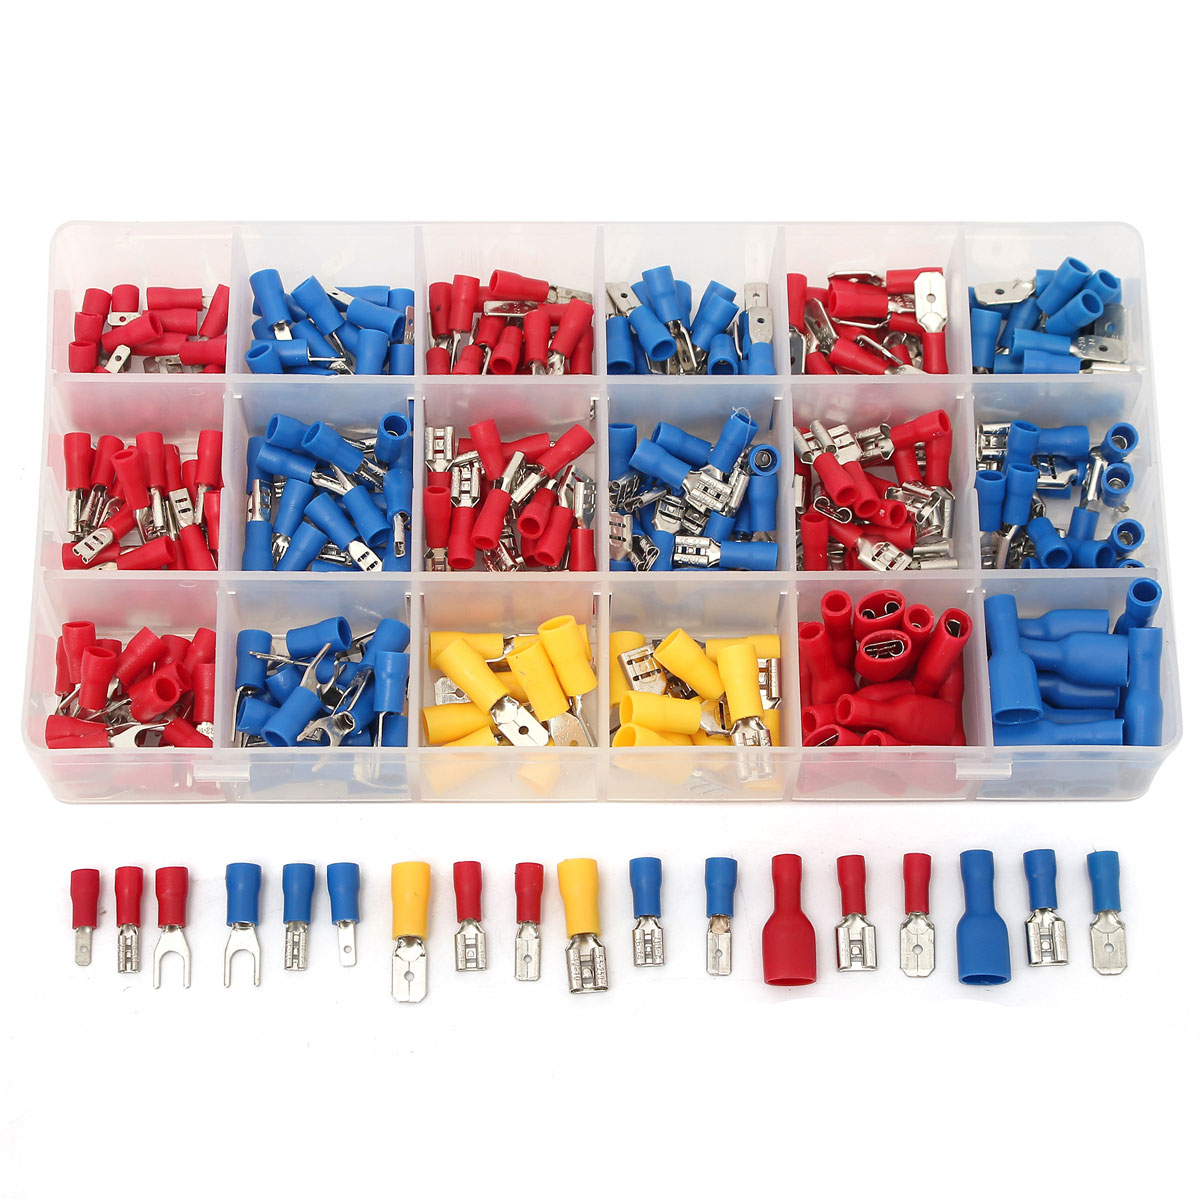 

Excellway CT018 330Pcs 18 Kinds Assorted Crimp Terminals Insulated Electrical Wiring Connector